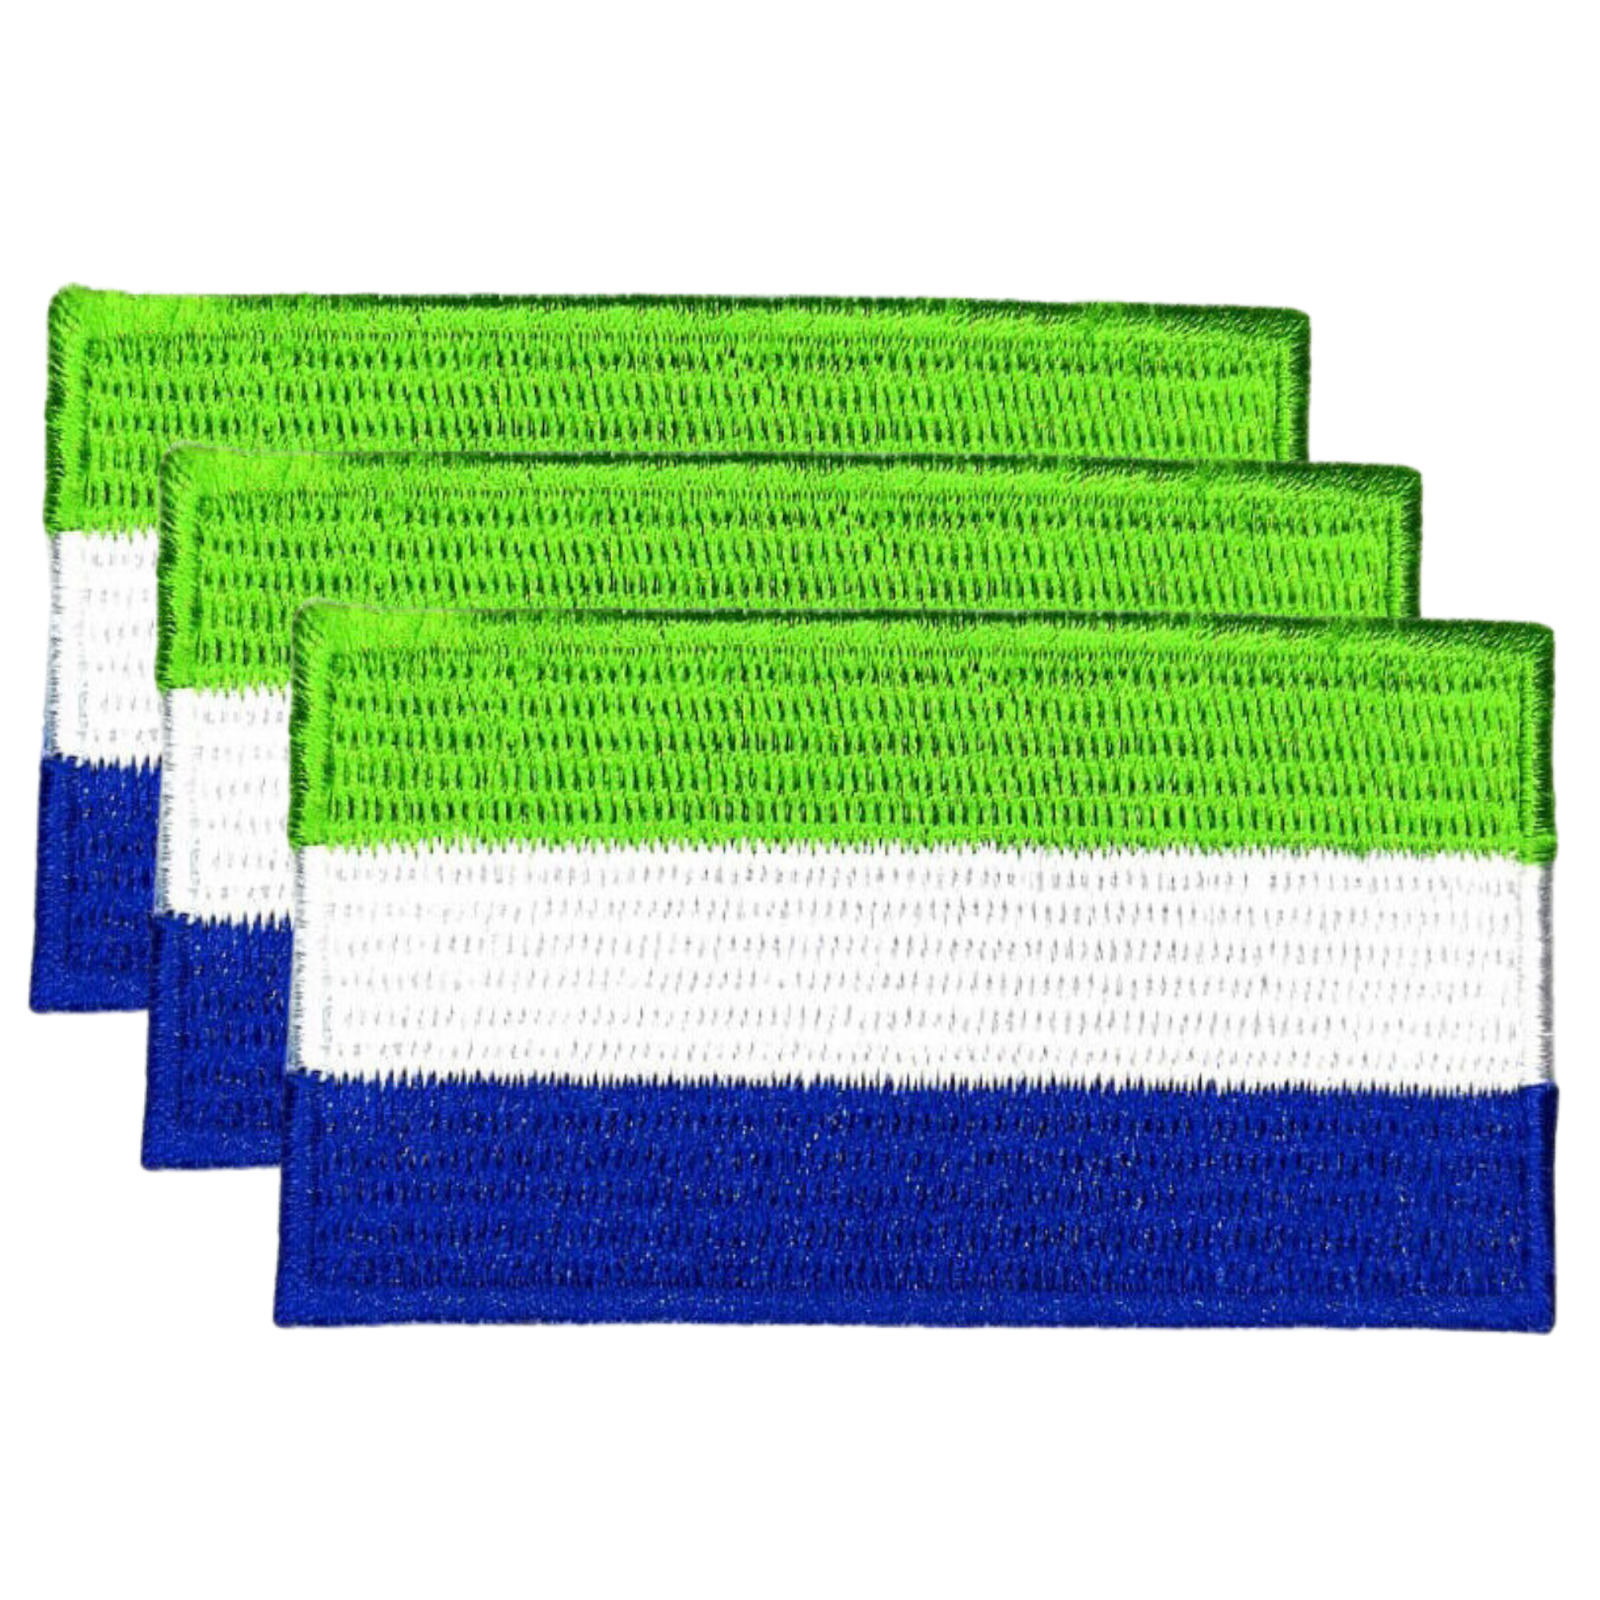 Sierra Leone International Country Flag Iron On Patch Embroidered Sew Badge x3